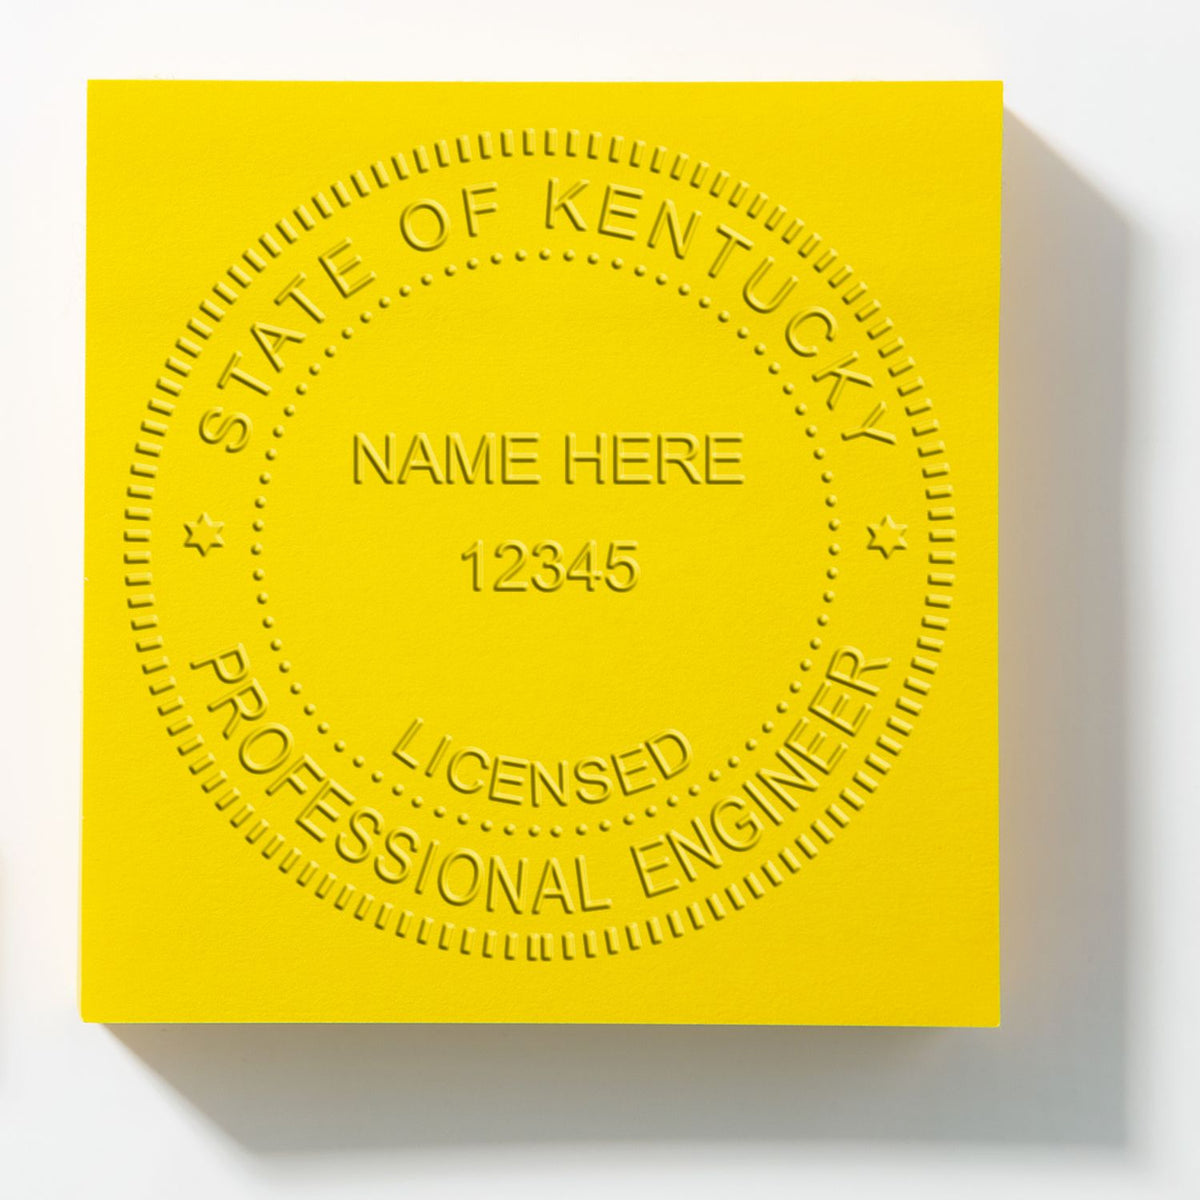 An alternative view of the Long Reach Kentucky PE Seal stamped on a sheet of paper showing the image in use